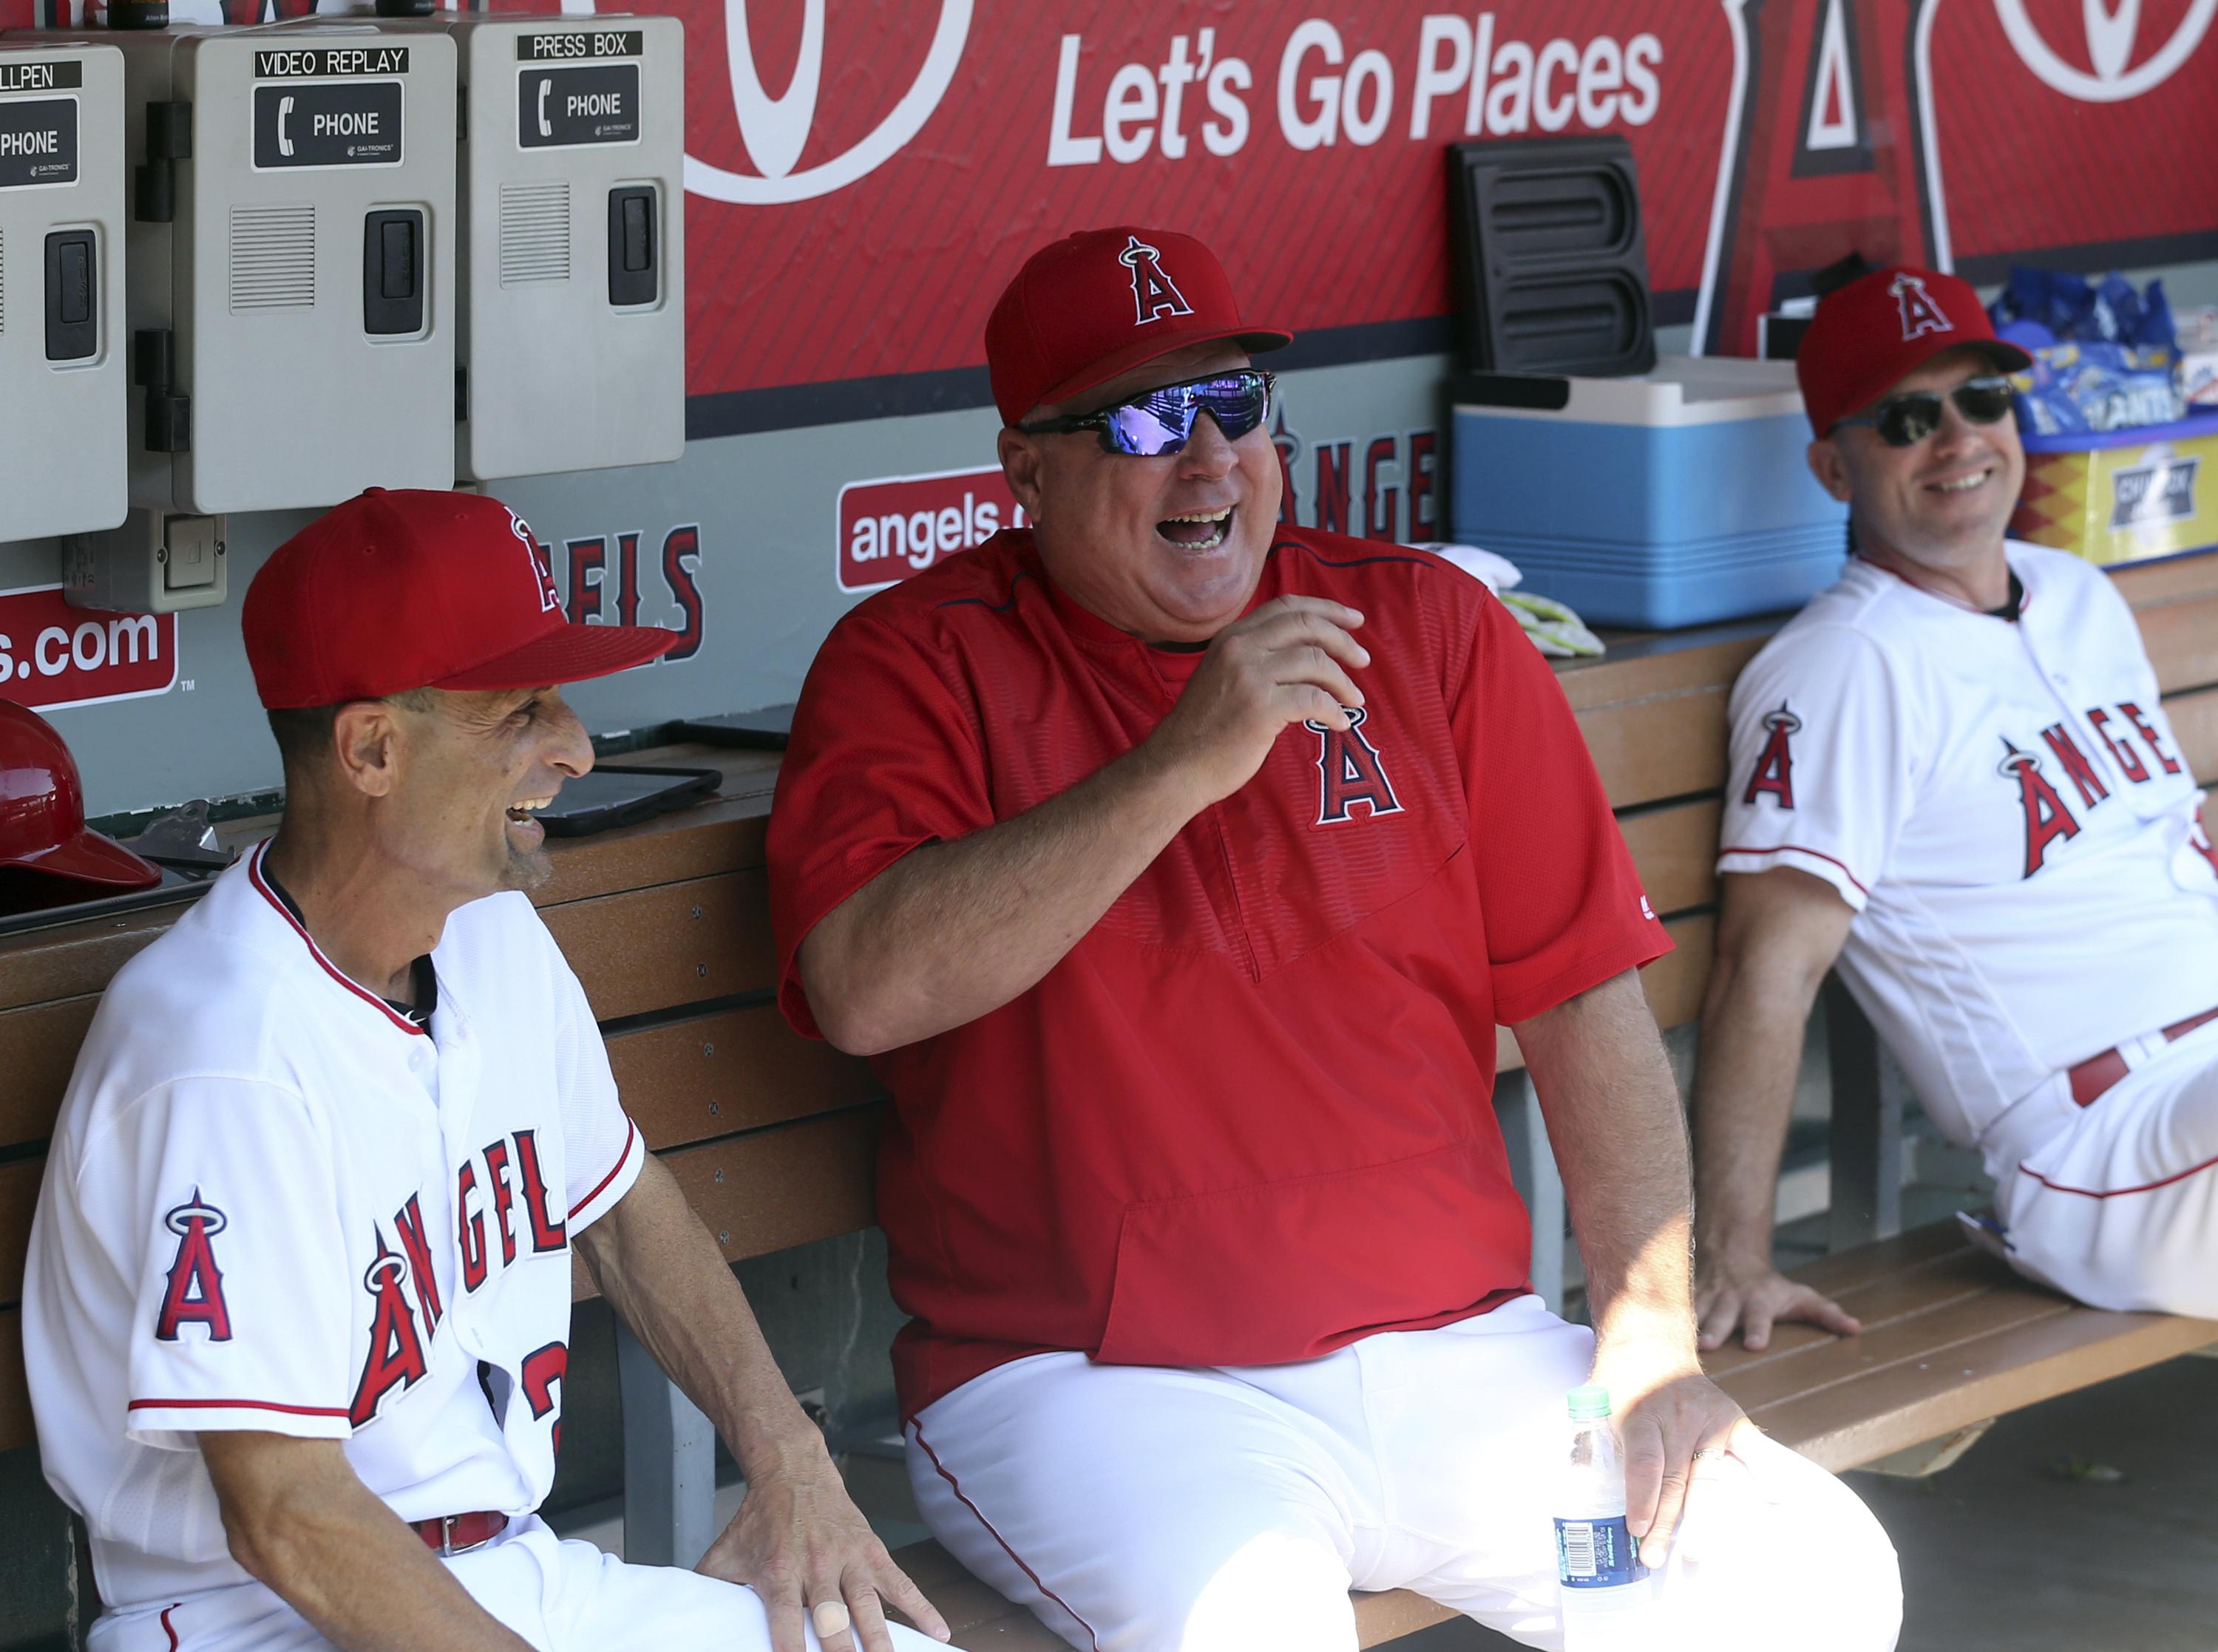 Mike Scioscia hoped he could quietly step away as Angels manager